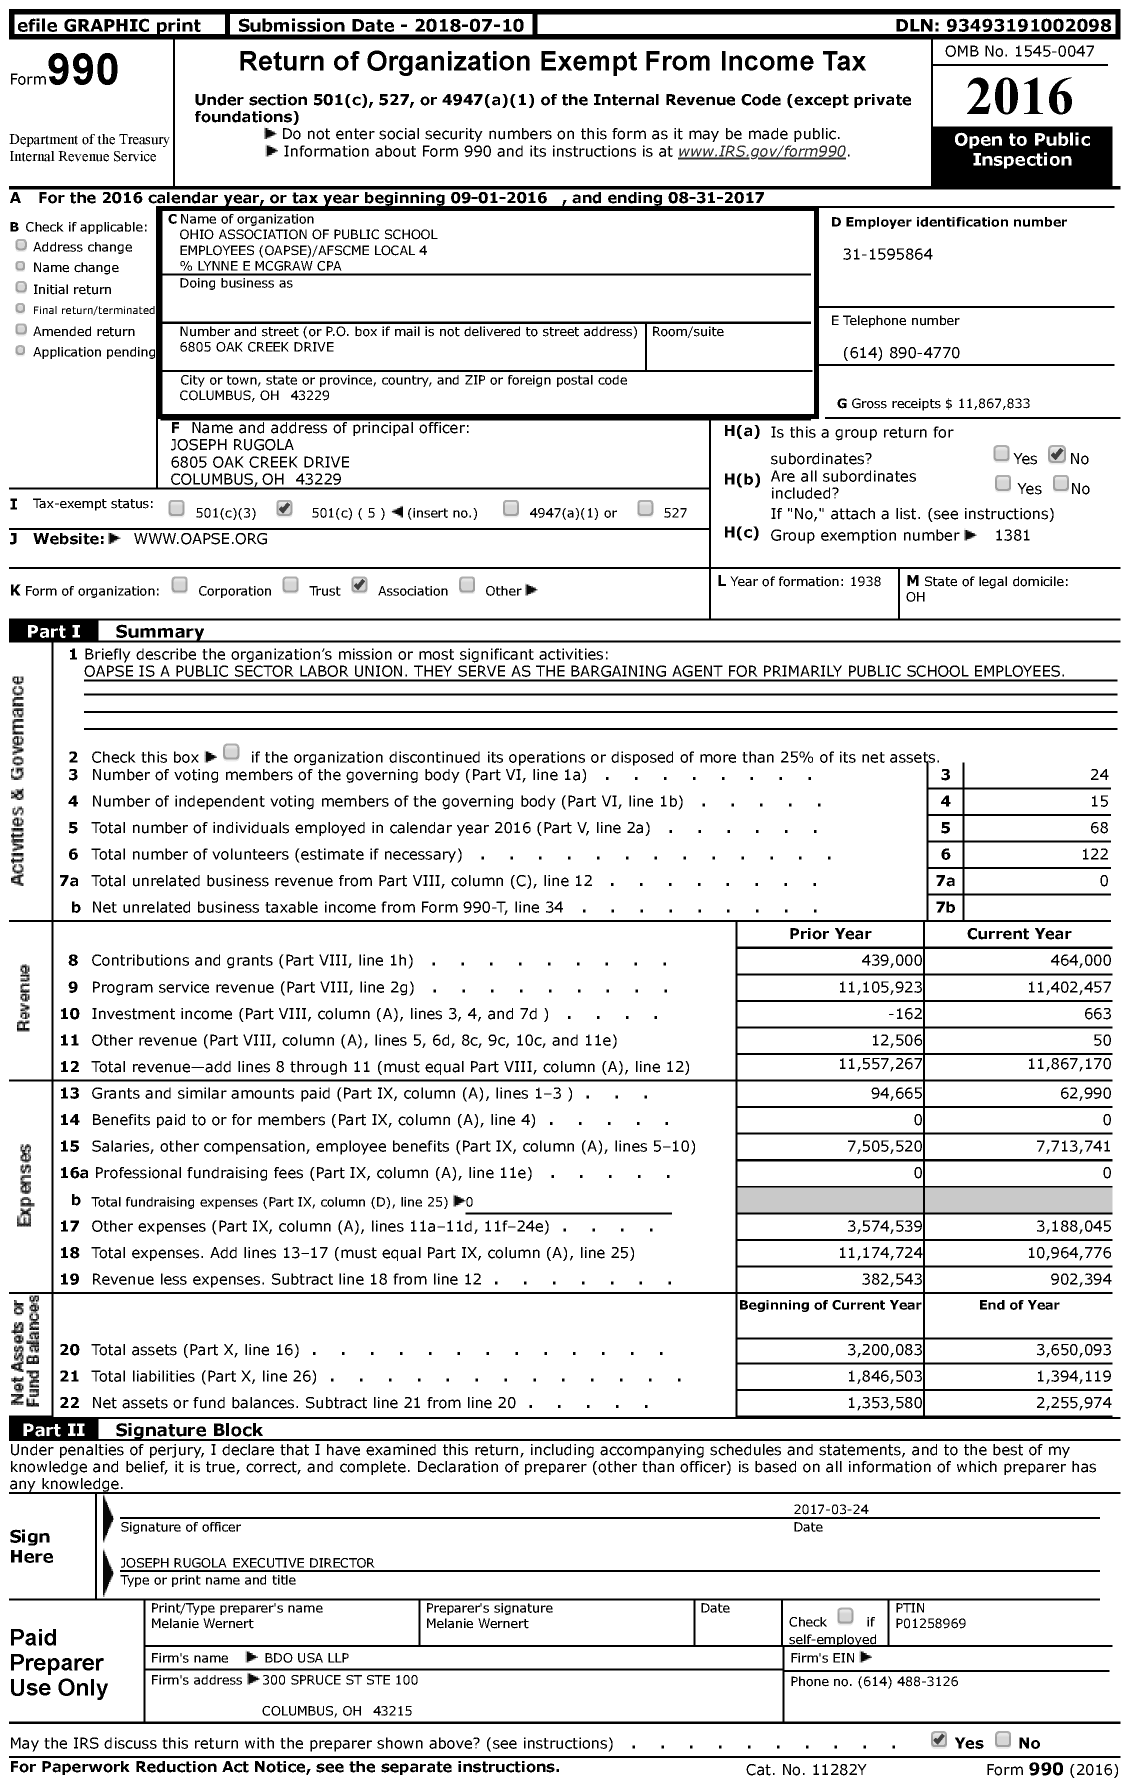 Image of first page of 2016 Form 990 for OAPSE / AFSCME Local 4